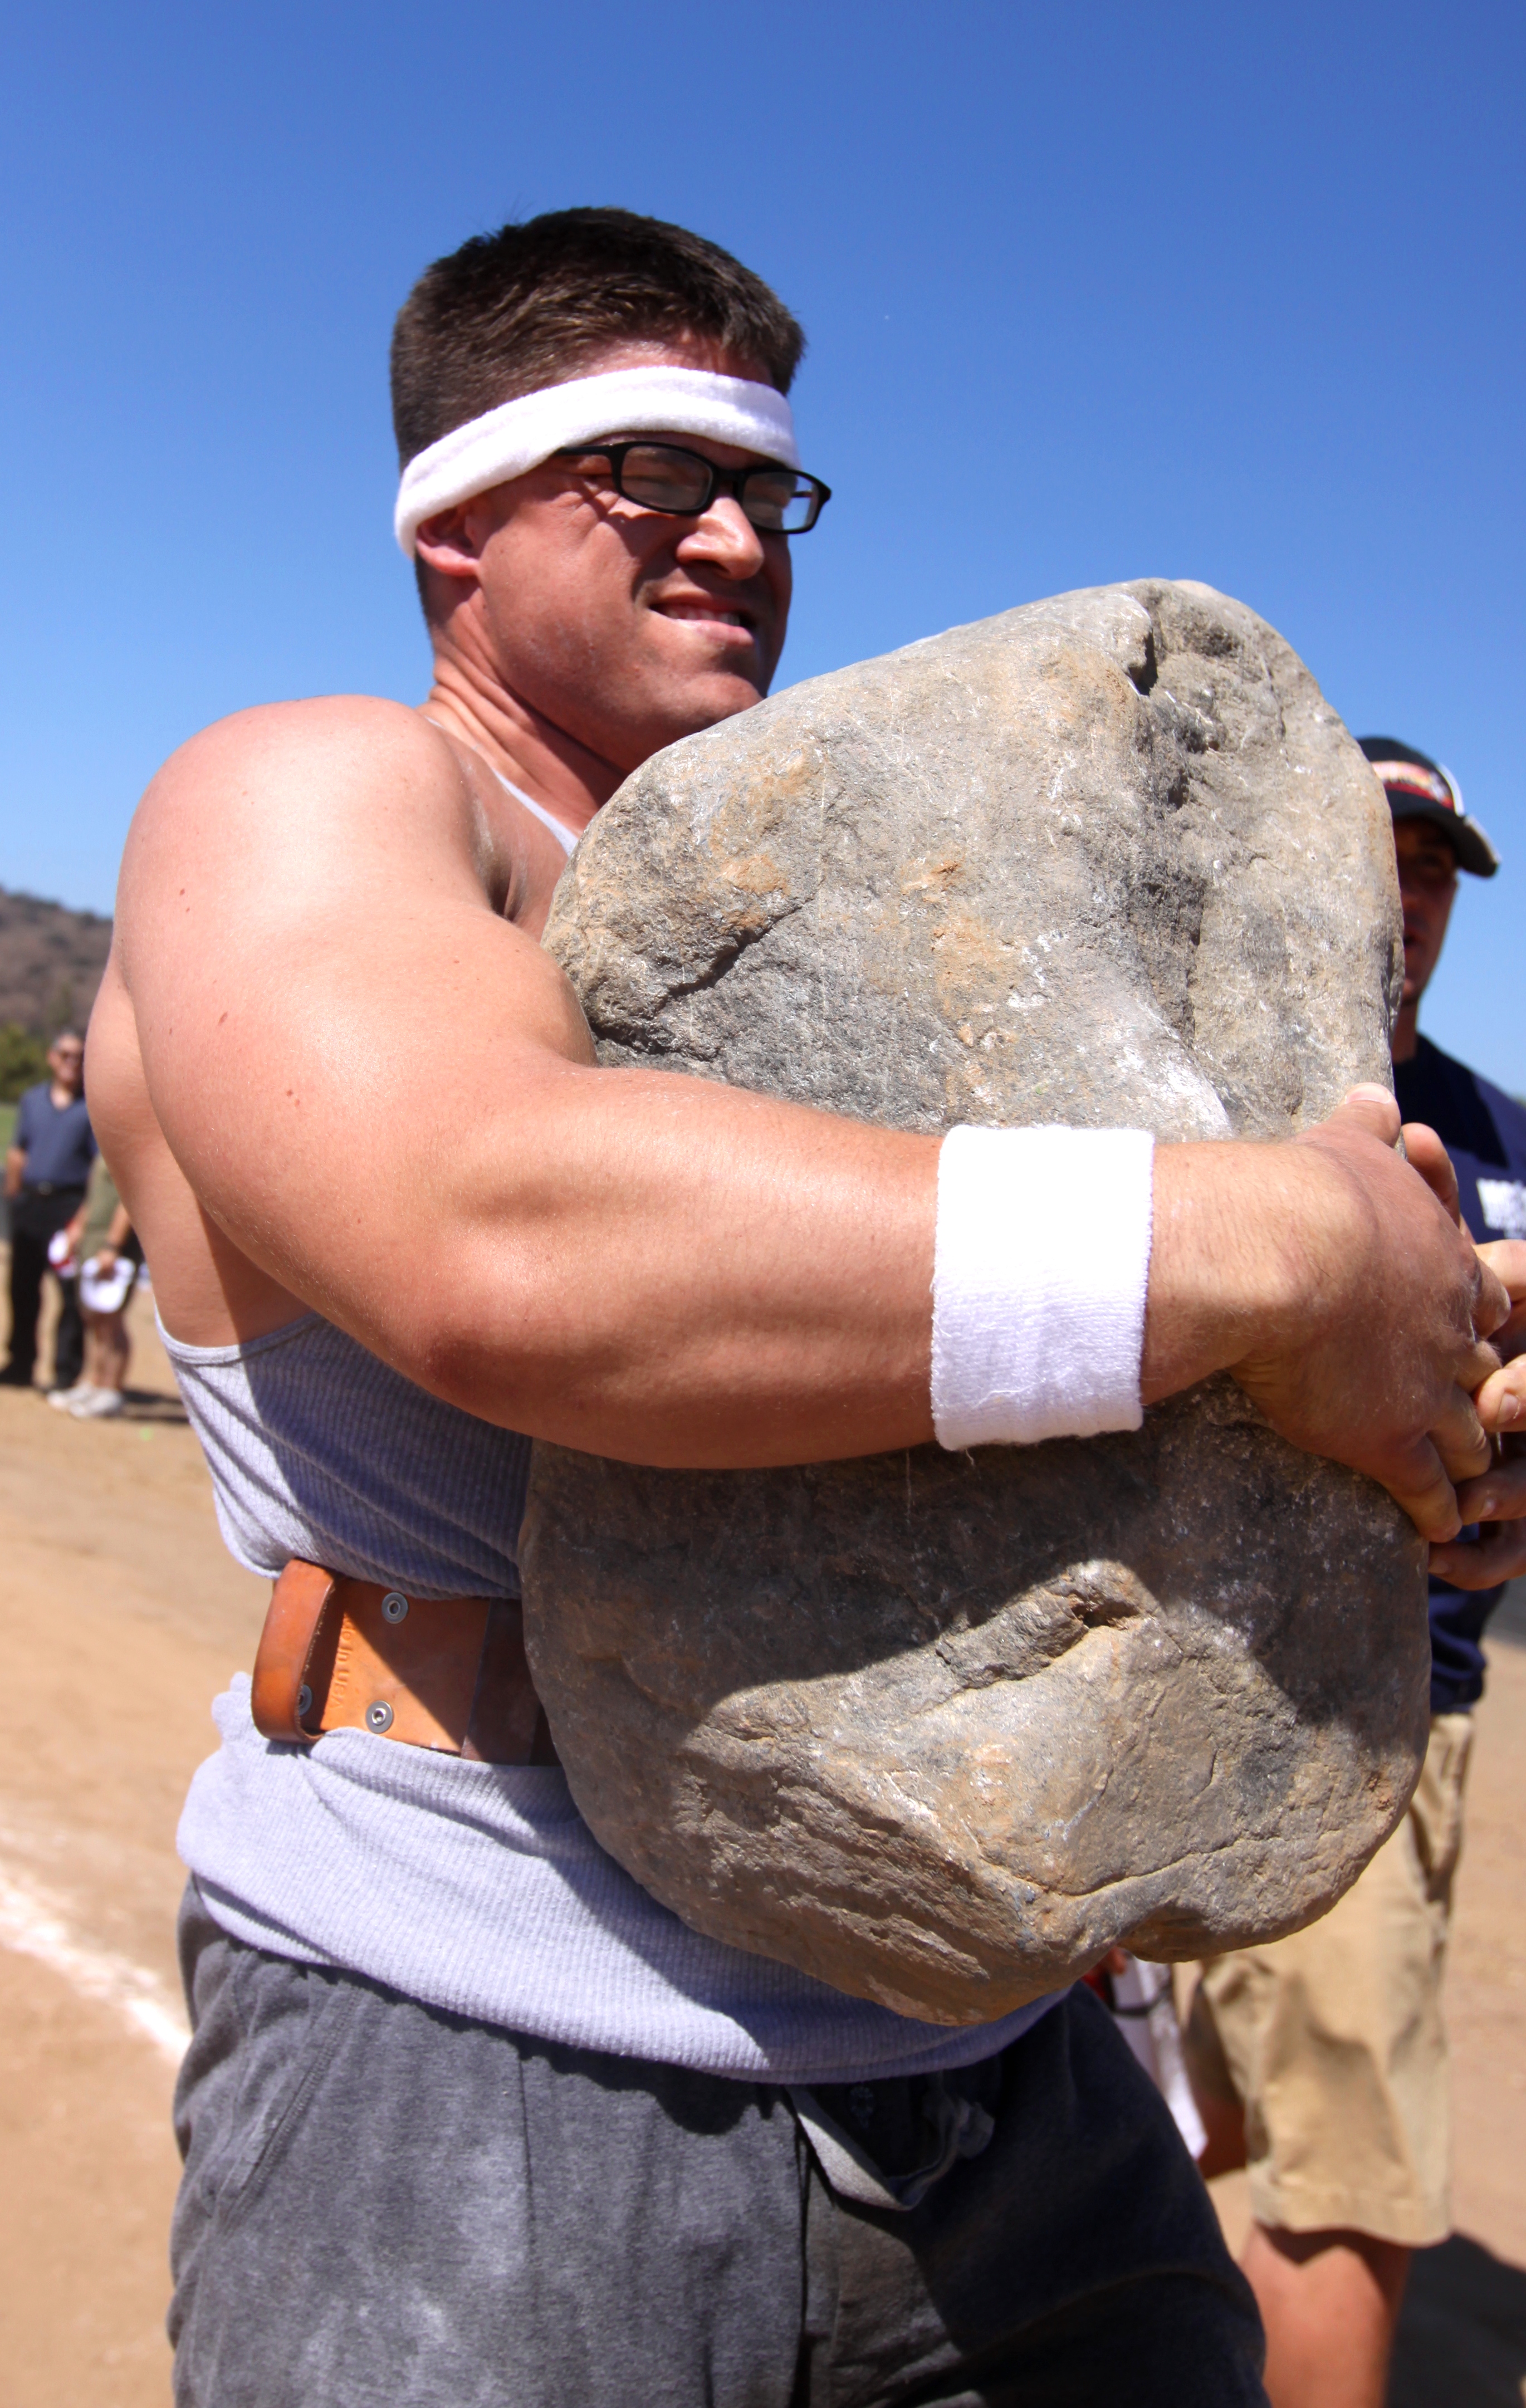 Marines test strength, endurance at 10th Annual Strongest Warrior